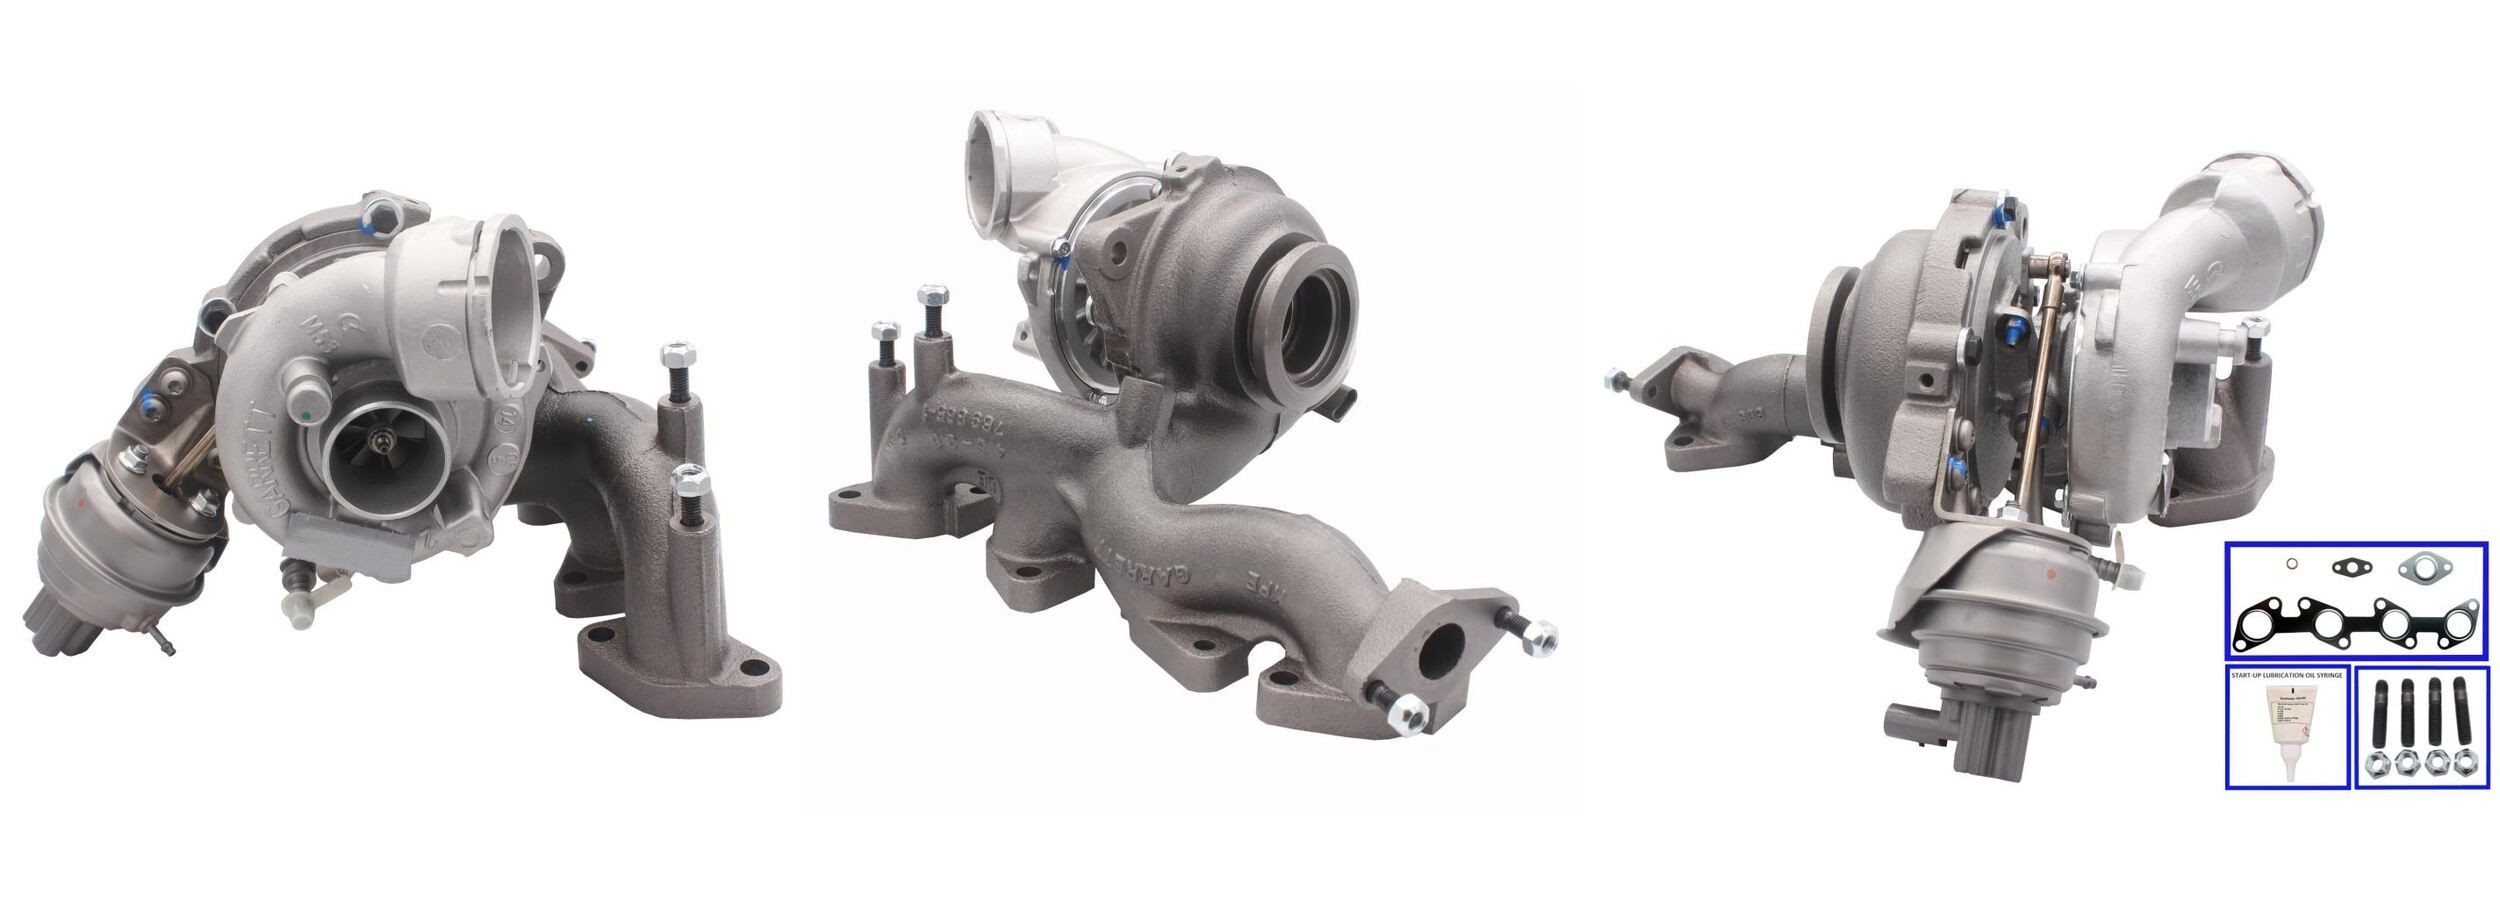 LUCAS LTRPA7686523 Turbocharger Exhaust Turbocharger, with linear position sensor (LPS), with gaskets/seals